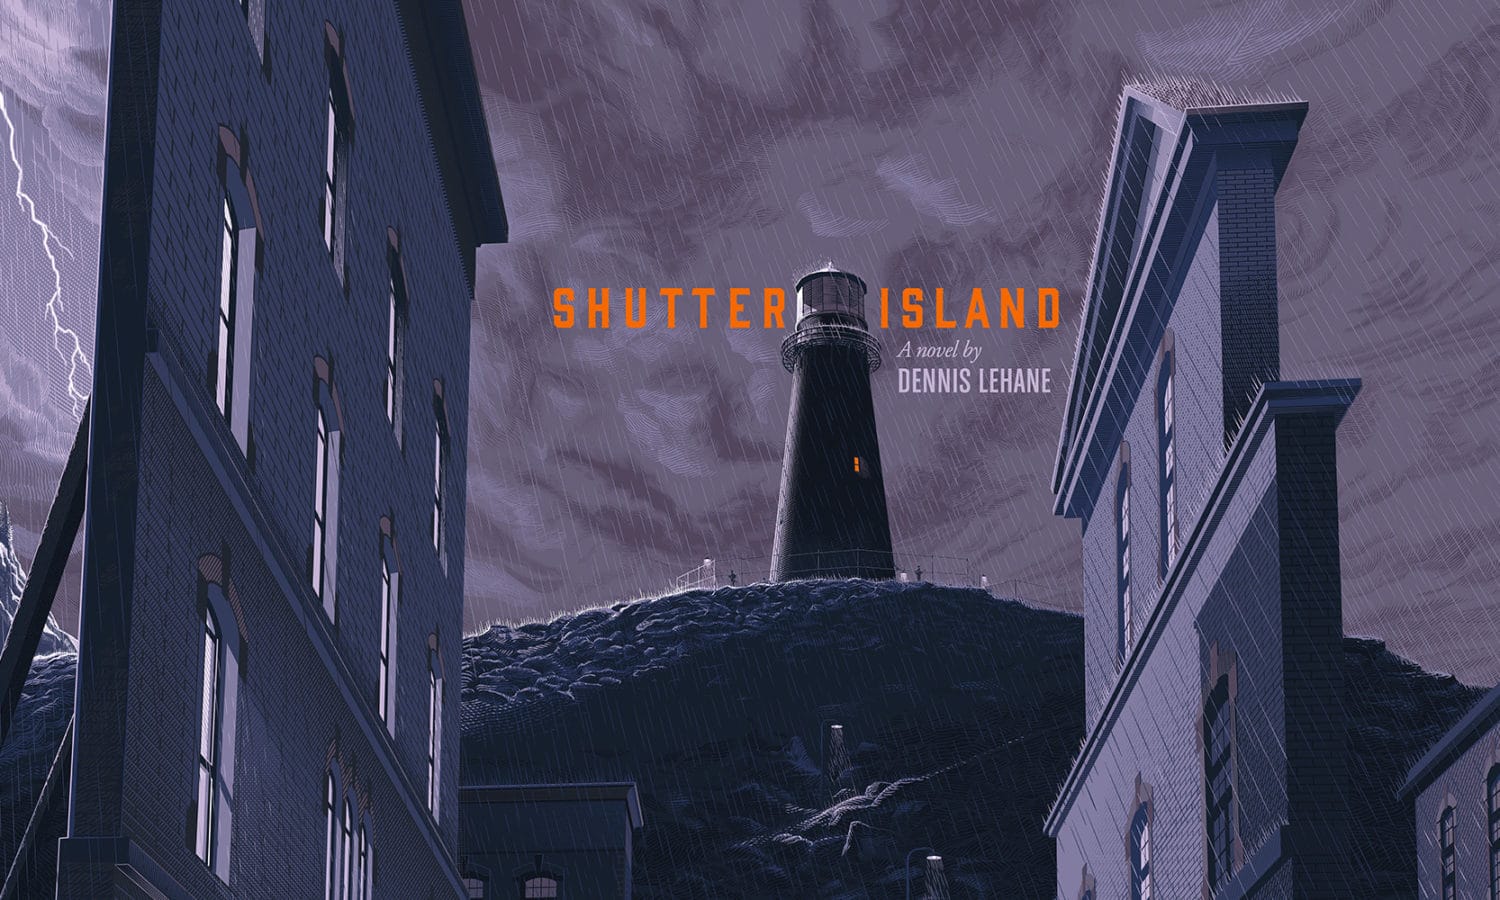 Shutter Island by Laurent Durieux